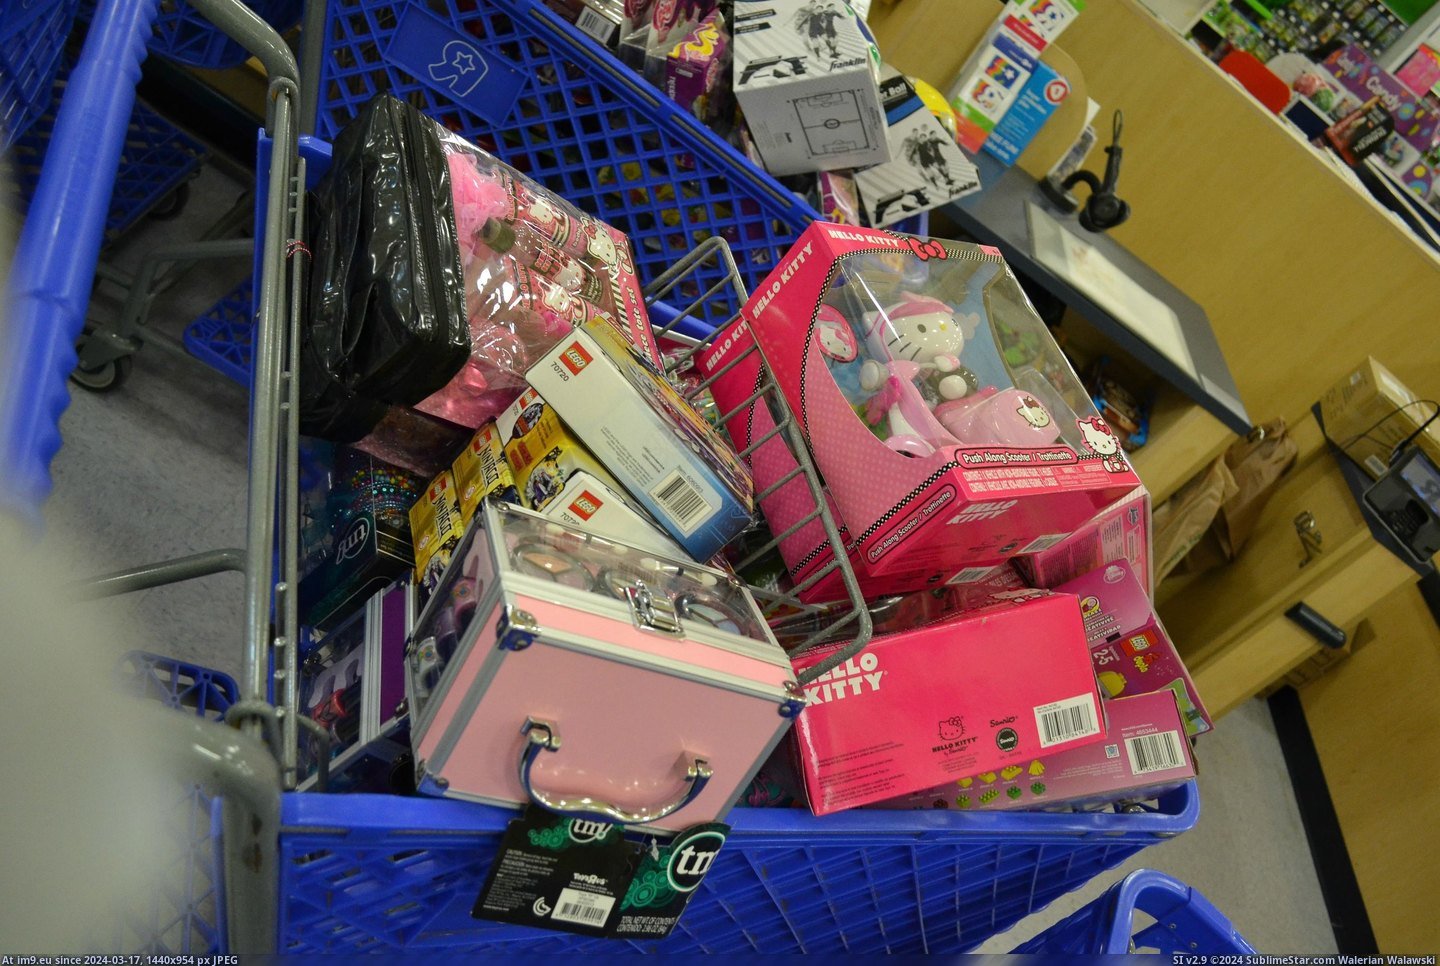 #For #Happy #All #Bunch #Tots #Donated #Christmas #Toys #Kids [Pics] Hopefully this makes a bunch of kids happy this Christmas all donated to Toys for Tots. 3 Pic. (Obraz z album My r/PICS favs))